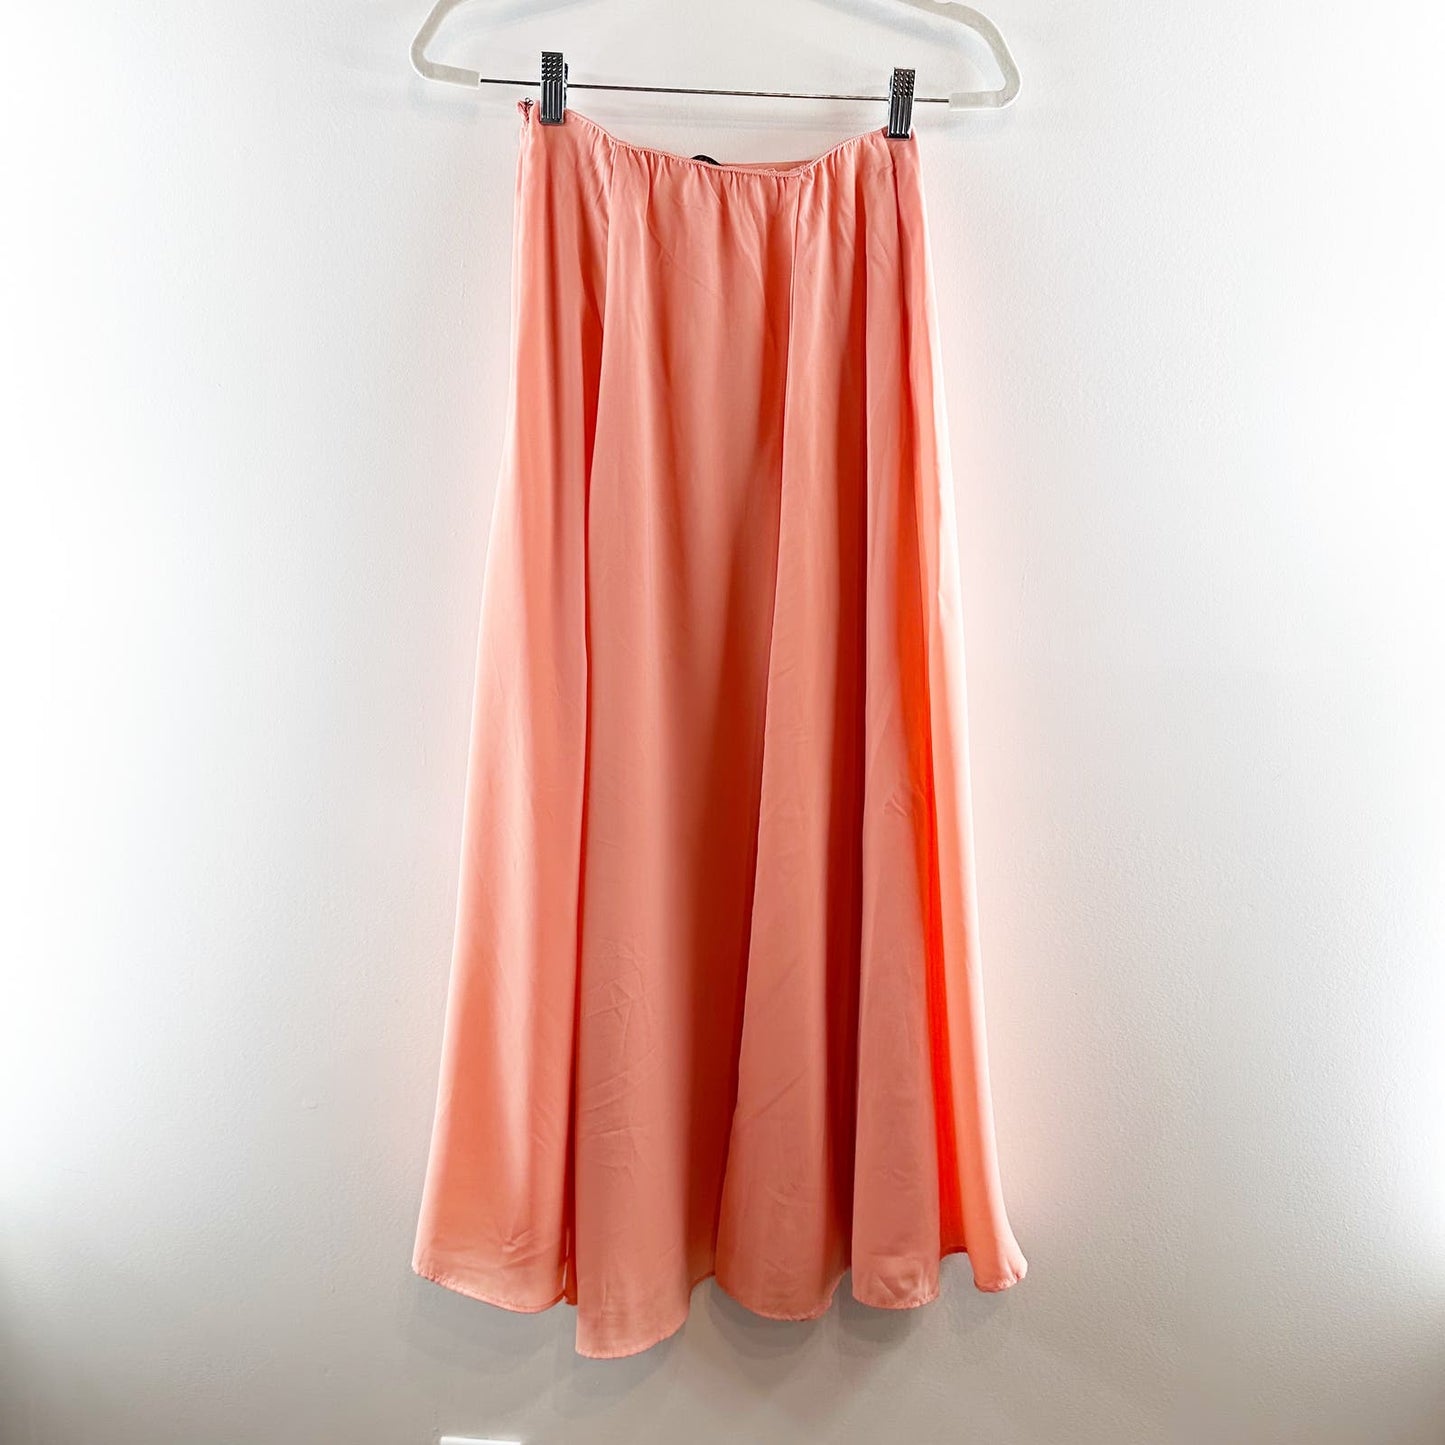 Abercrombie & Fitch Satin Wrap Slit Maxi Skirt Coral Peach Pink XS